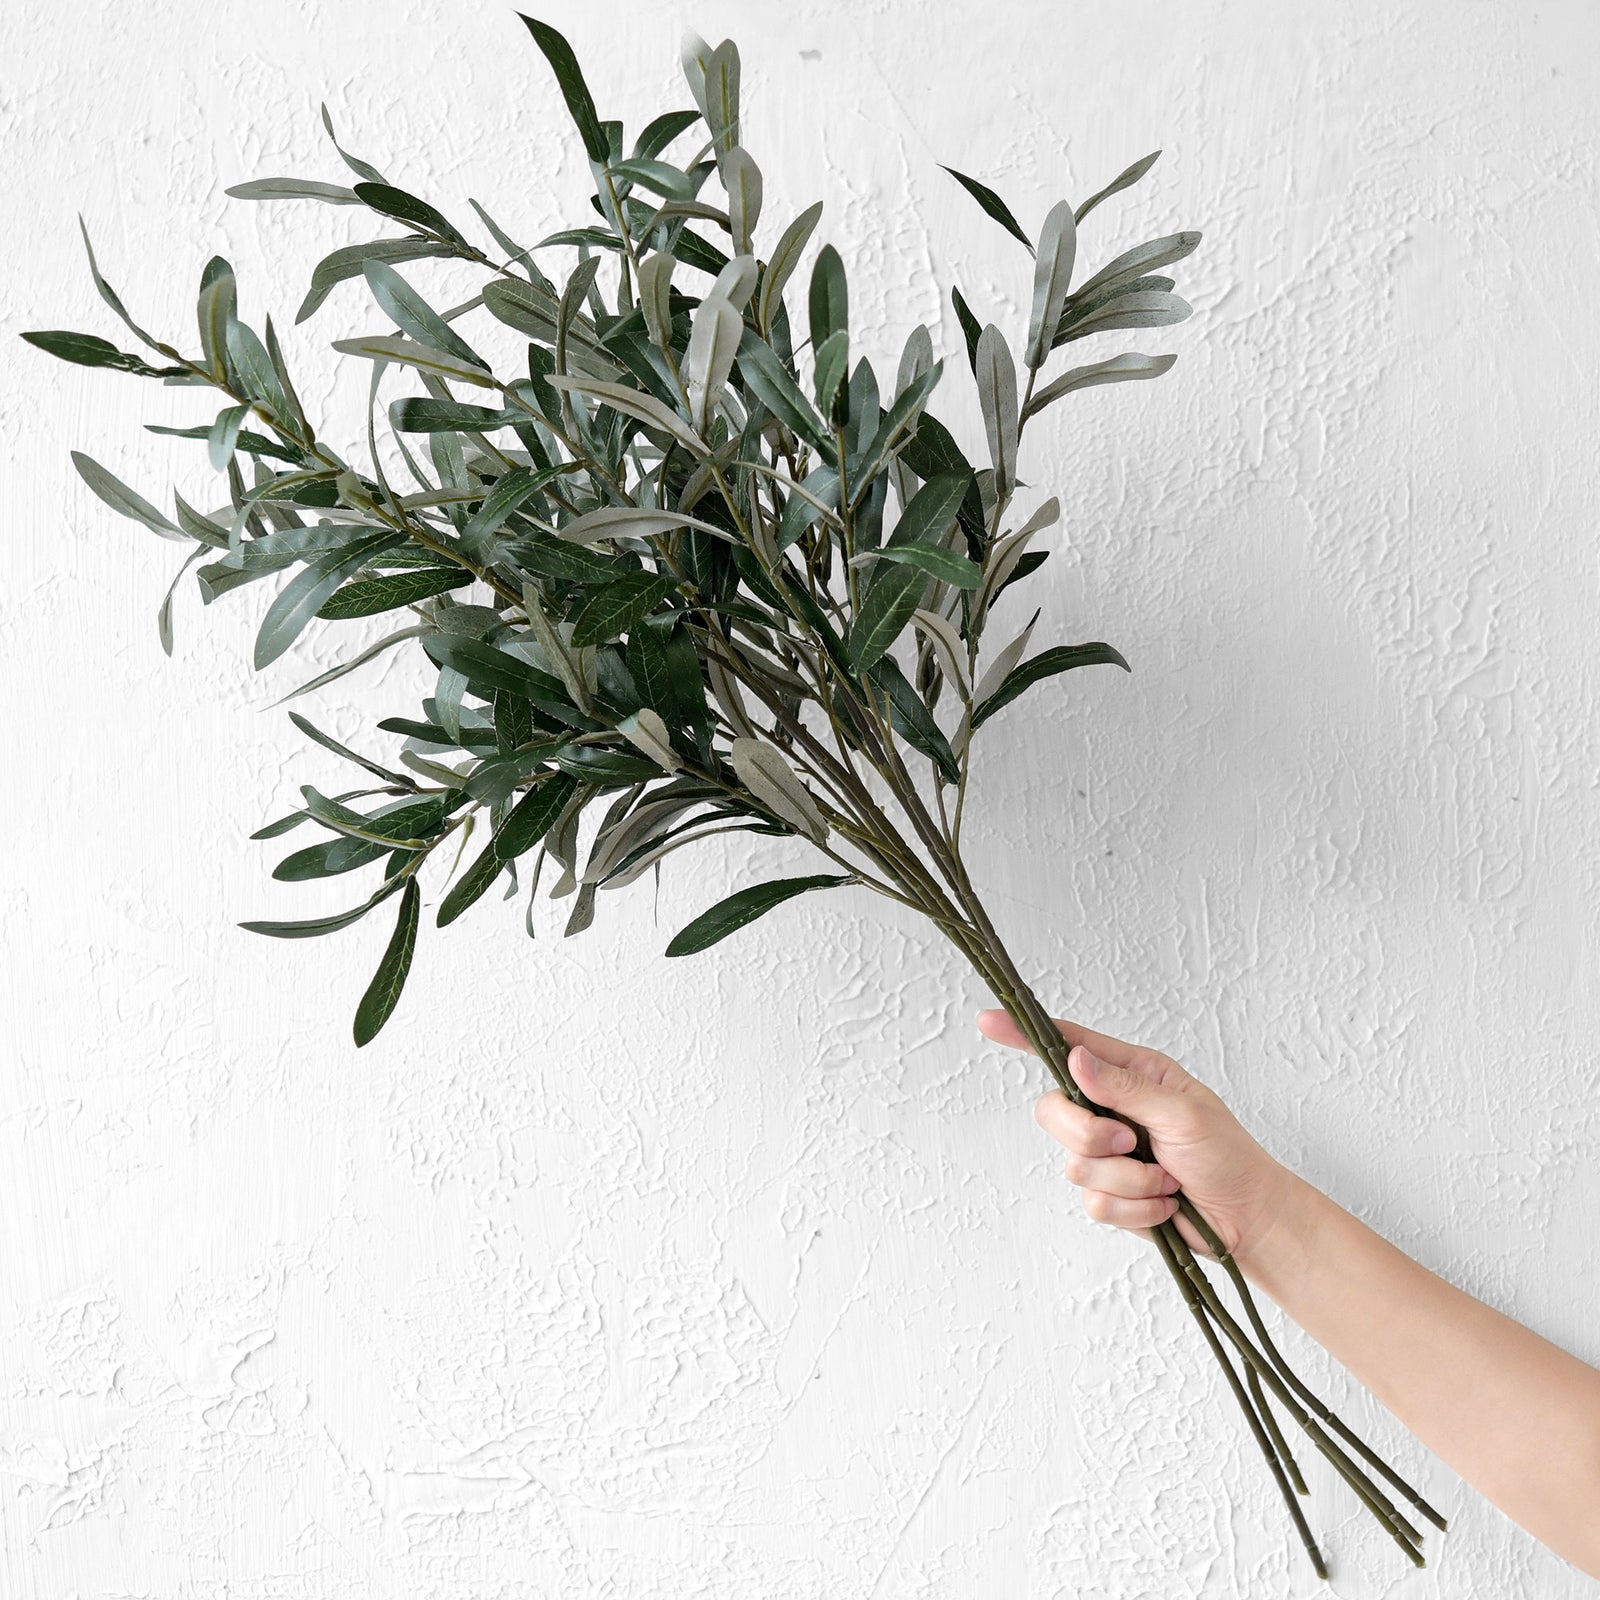 Lifelike Premium Olive Stems: Quality 30-inch Artificial Greenery for Floral Arrangements and Stylish Decor (6 Stems)